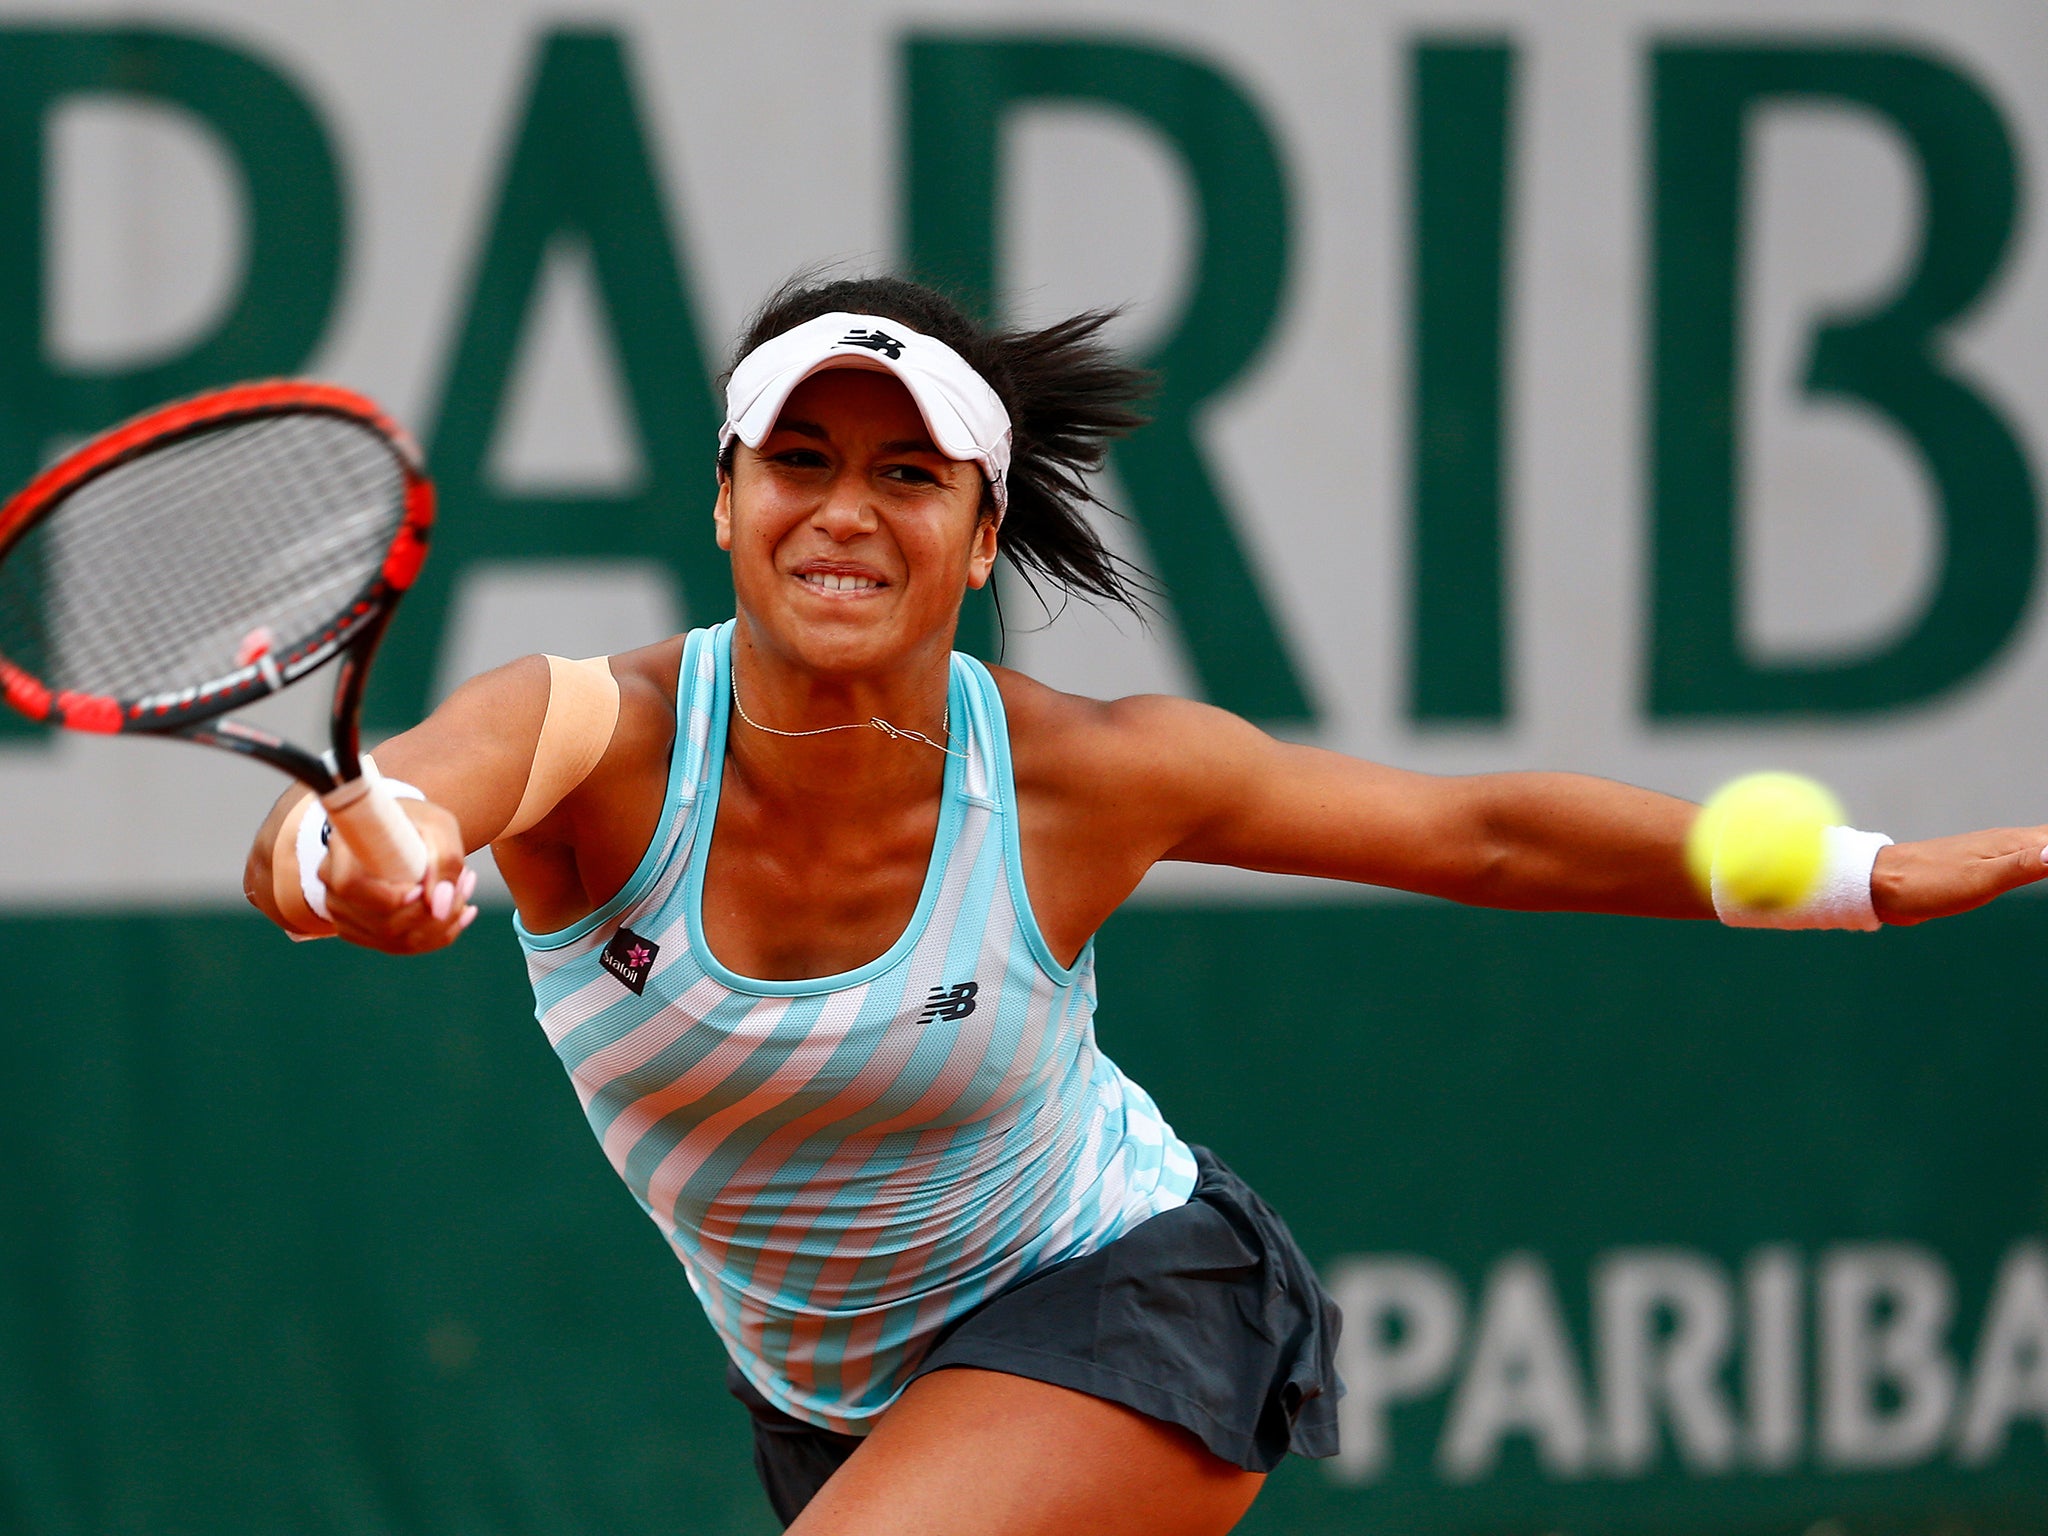 Heather Watson suffered a 6-2 6-4 defeat to Sloane Stephens